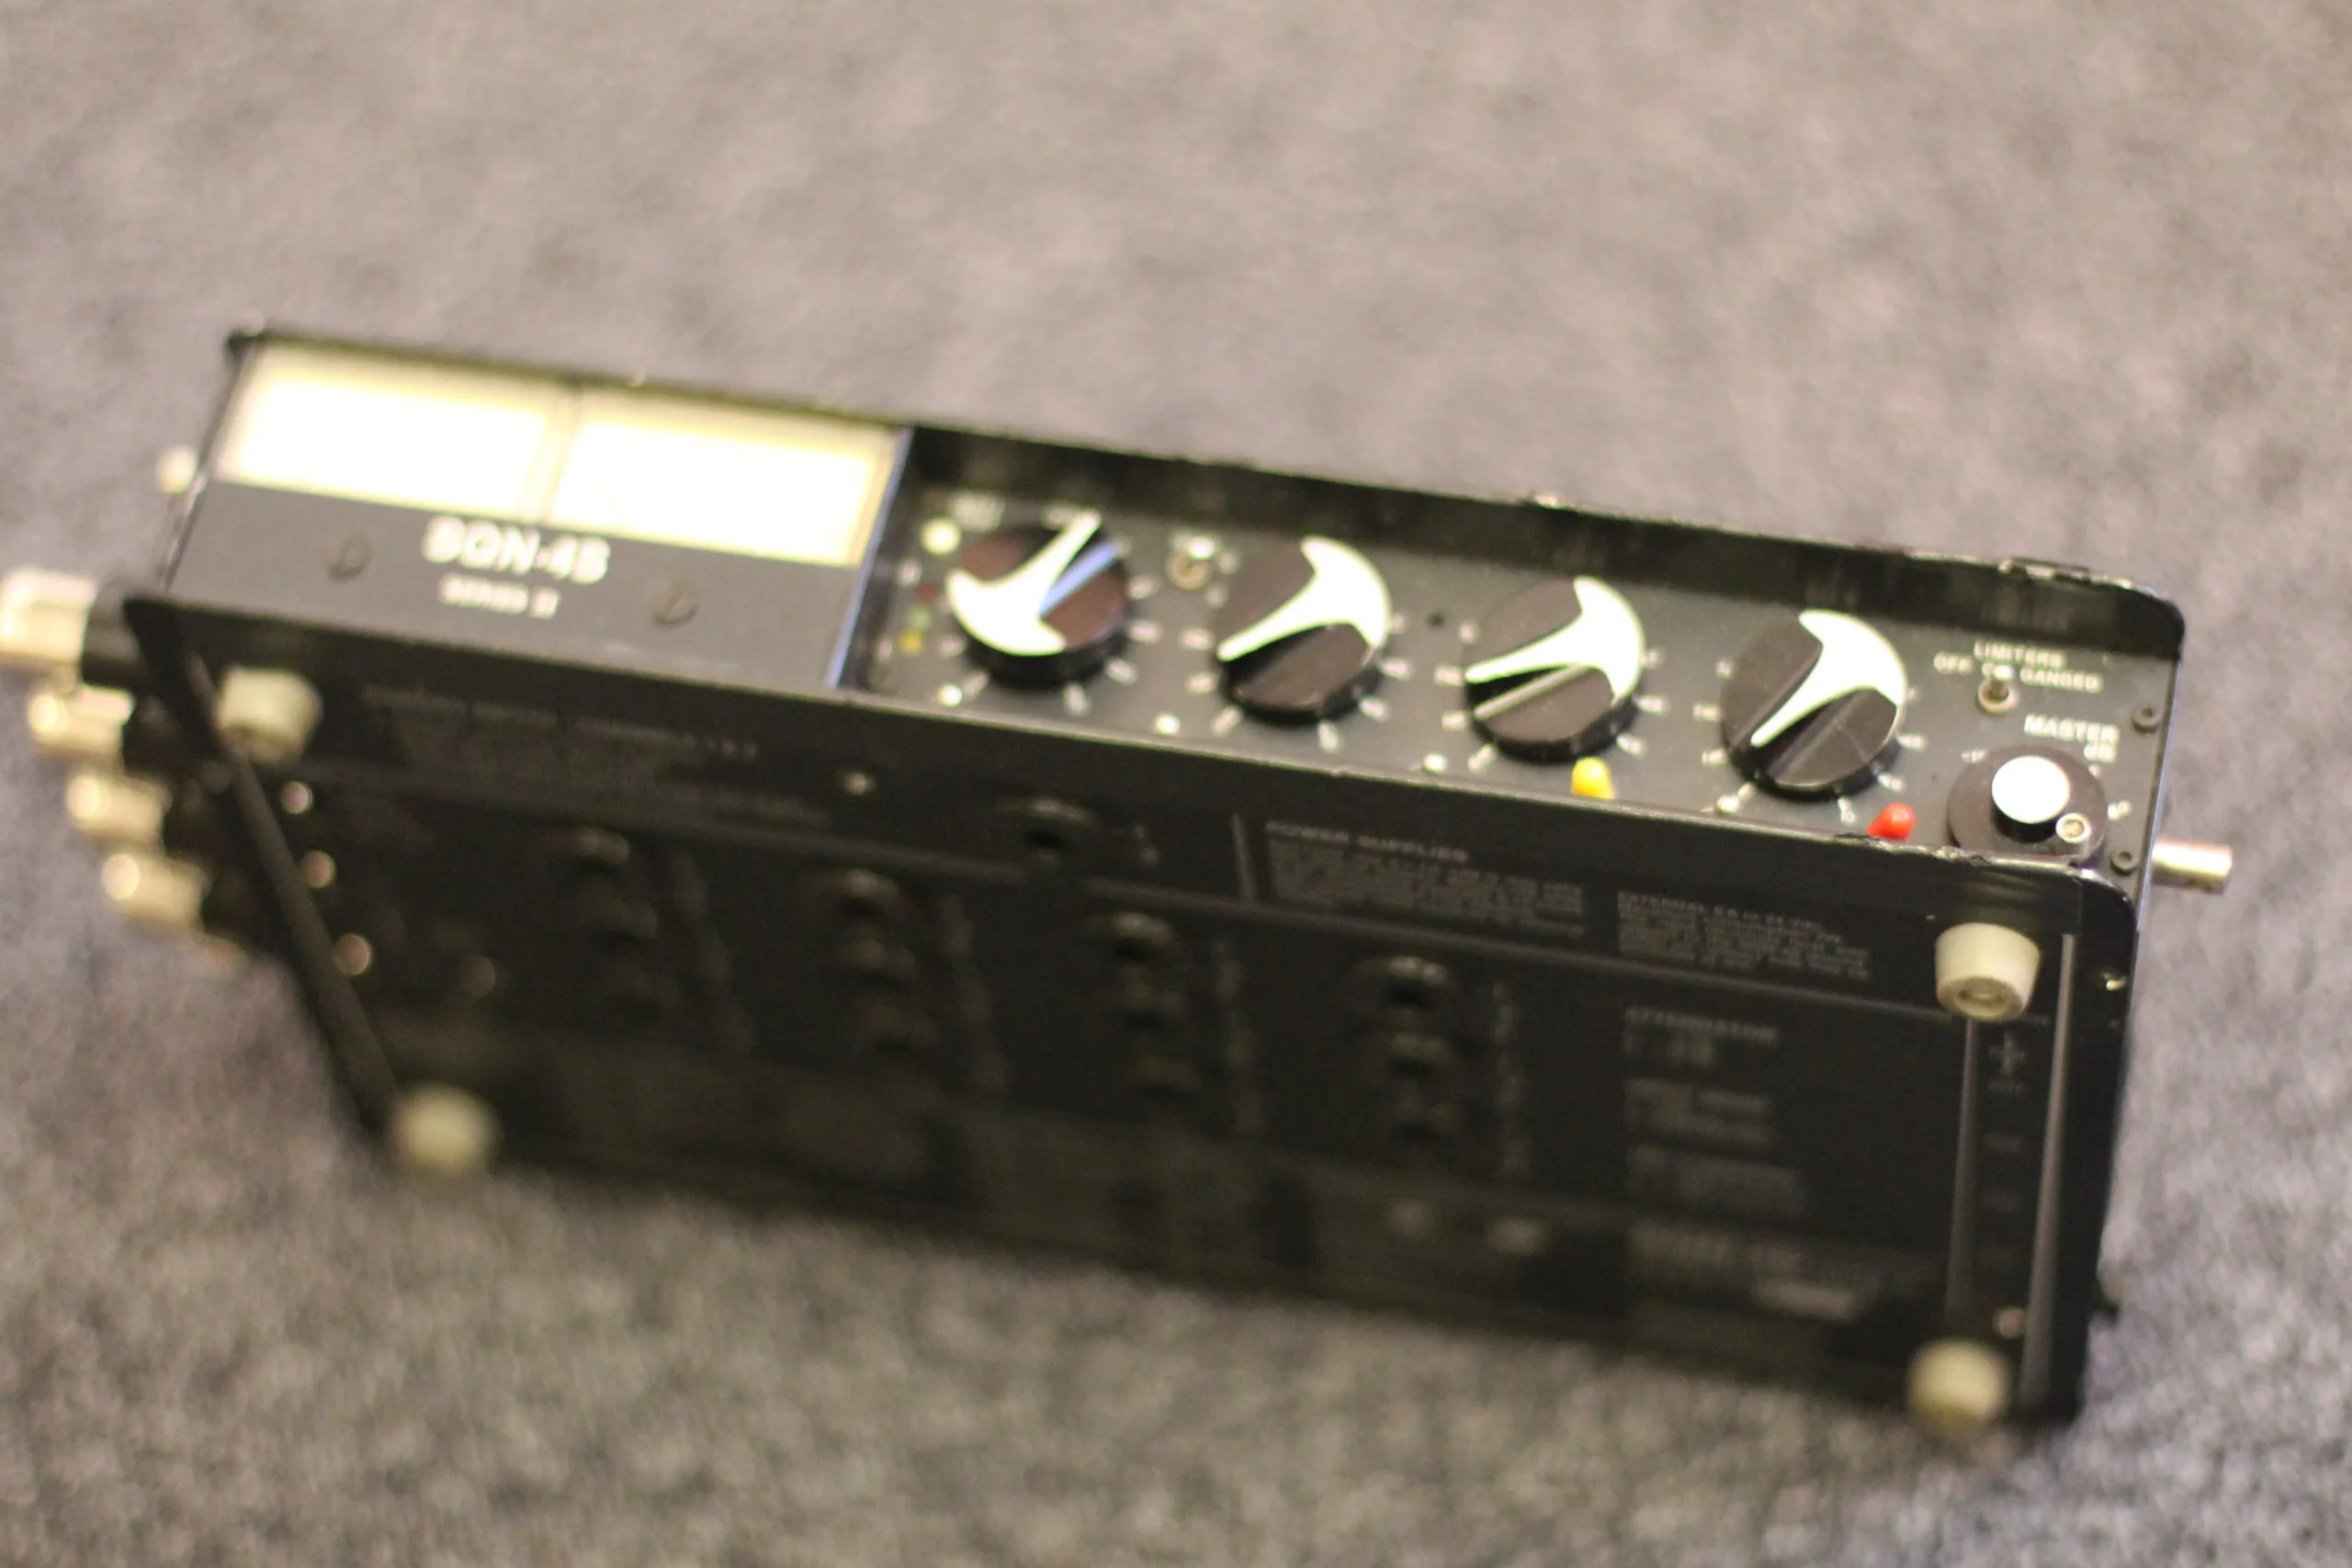 A sound mixer with various knobs and buttons, used to adjust audio levels in a recording studio.